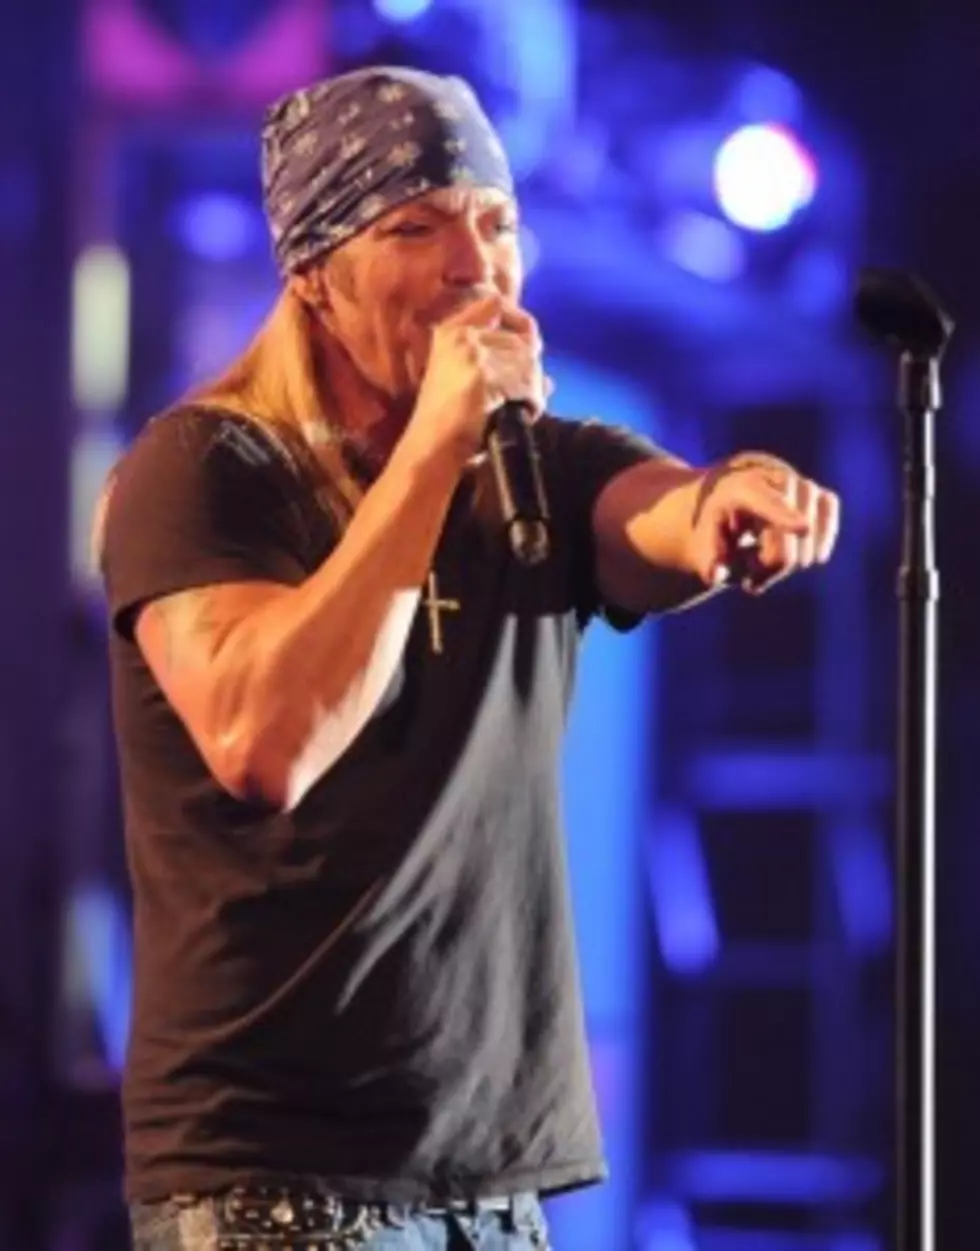 Bret Michaels Getting Ready To Drop New Solo Album